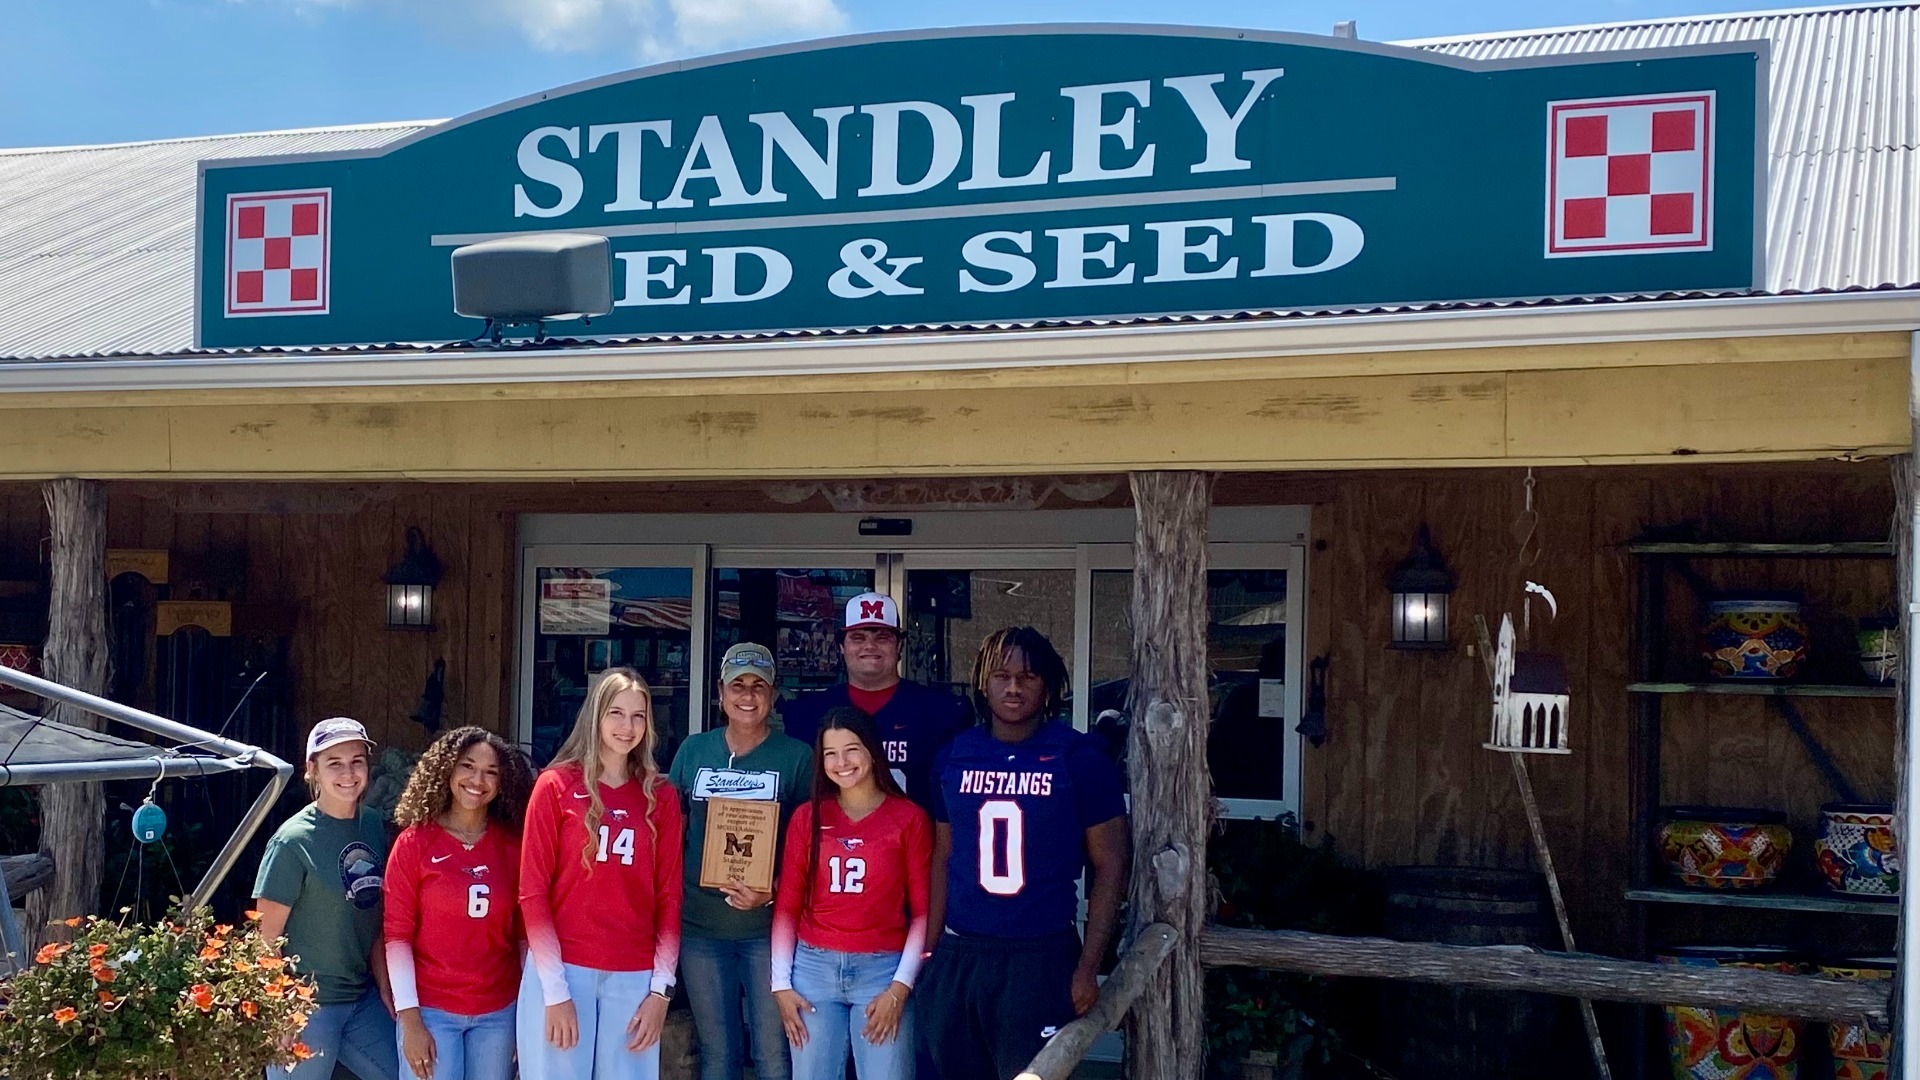 Slide 3 - Standley Feed & Seed Thanks for your support of MCISD  Athletics!